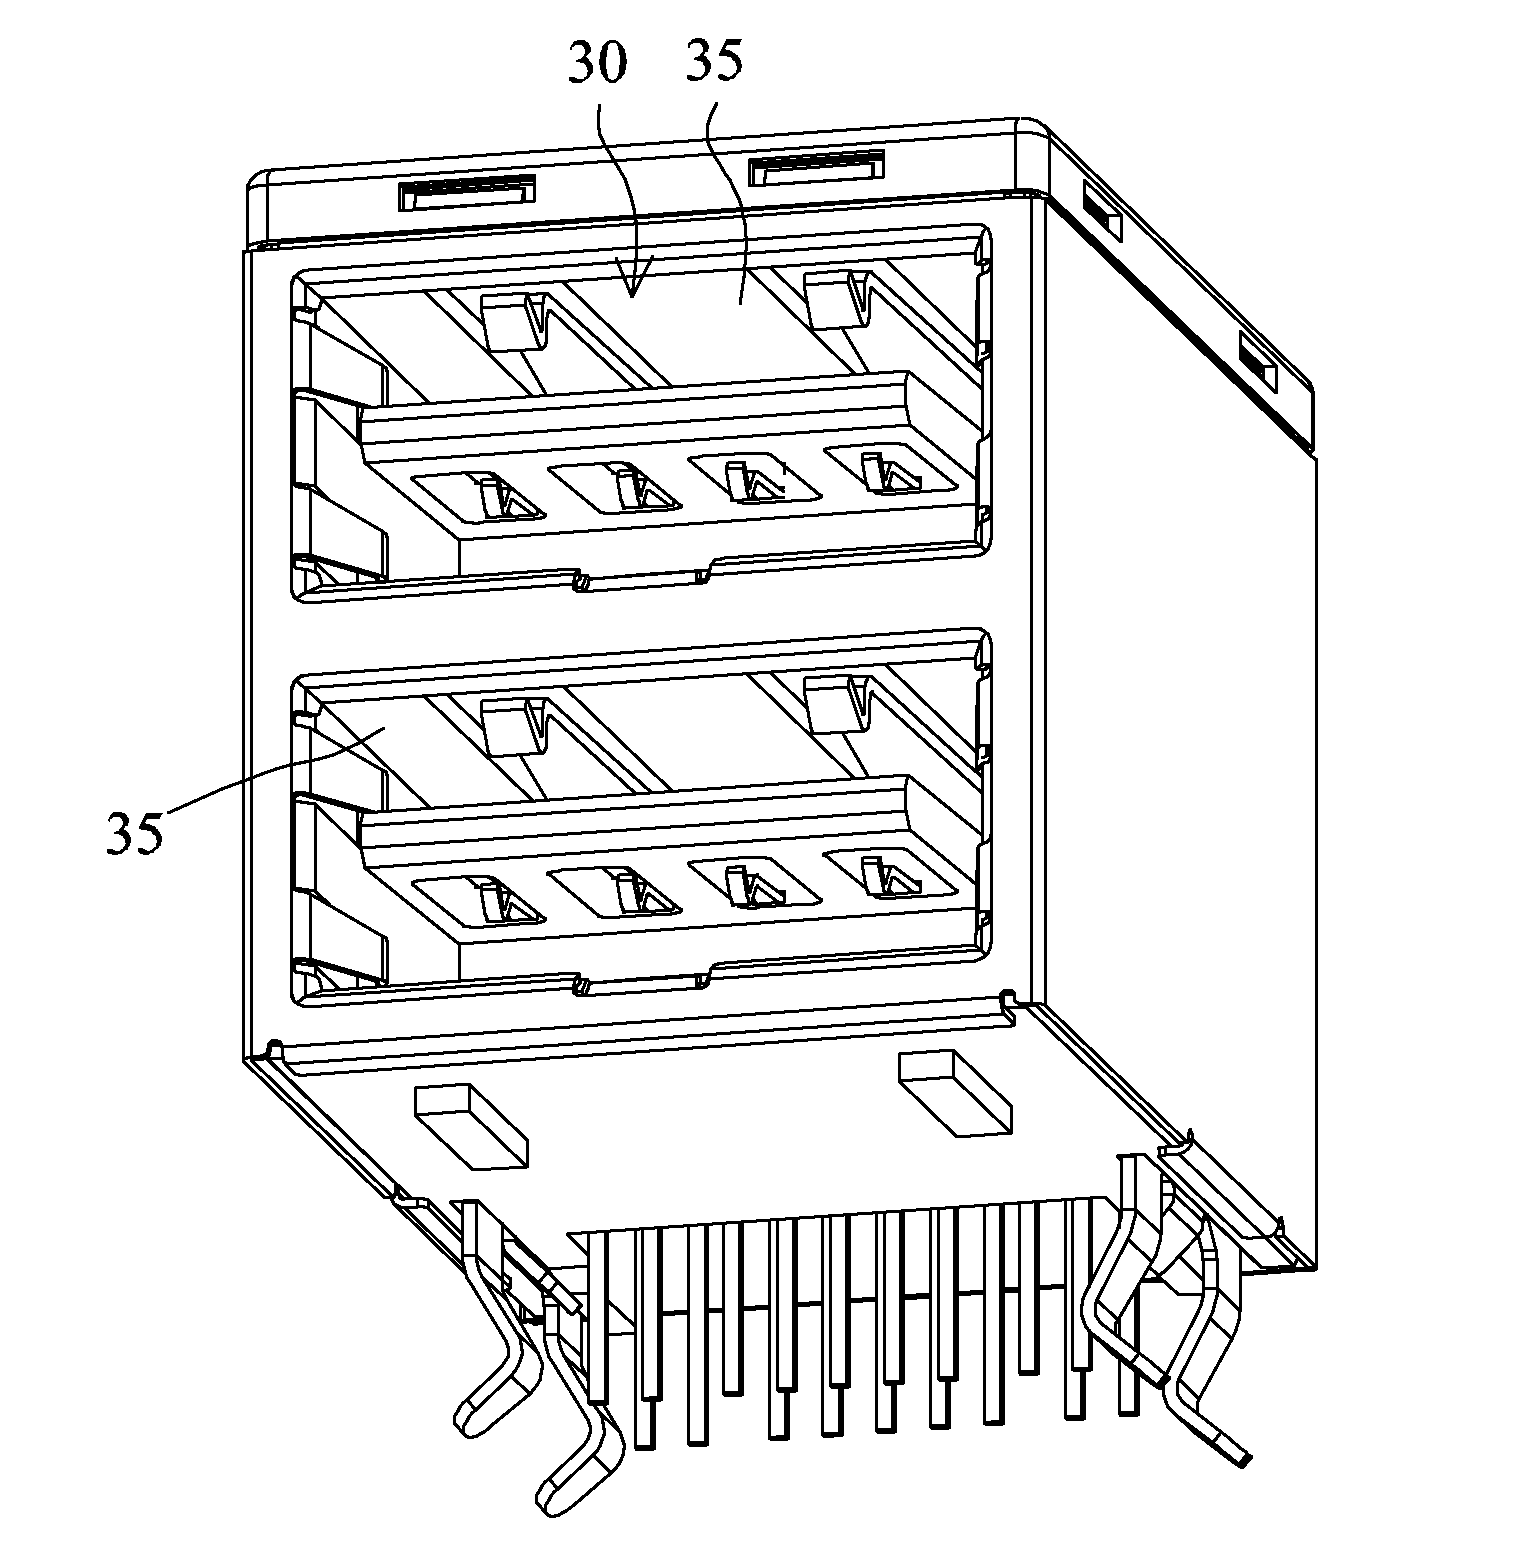 Socket structure with duplex electrical connection